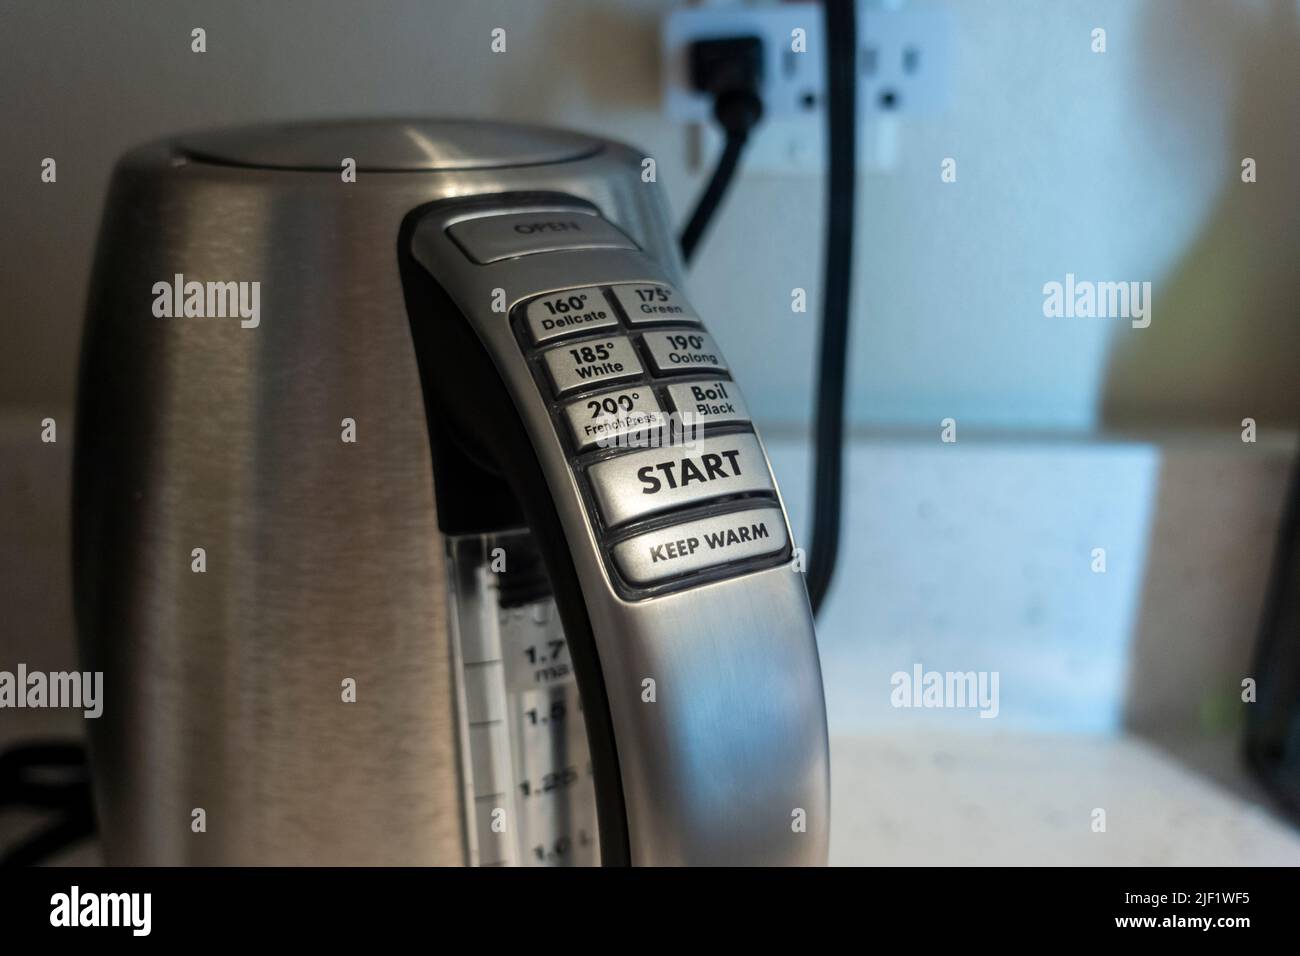 Seattle, WA USA - circa May 2022: Selective focus on a Cuisinart electric kettle inside a domestic kitchen. Stock Photo